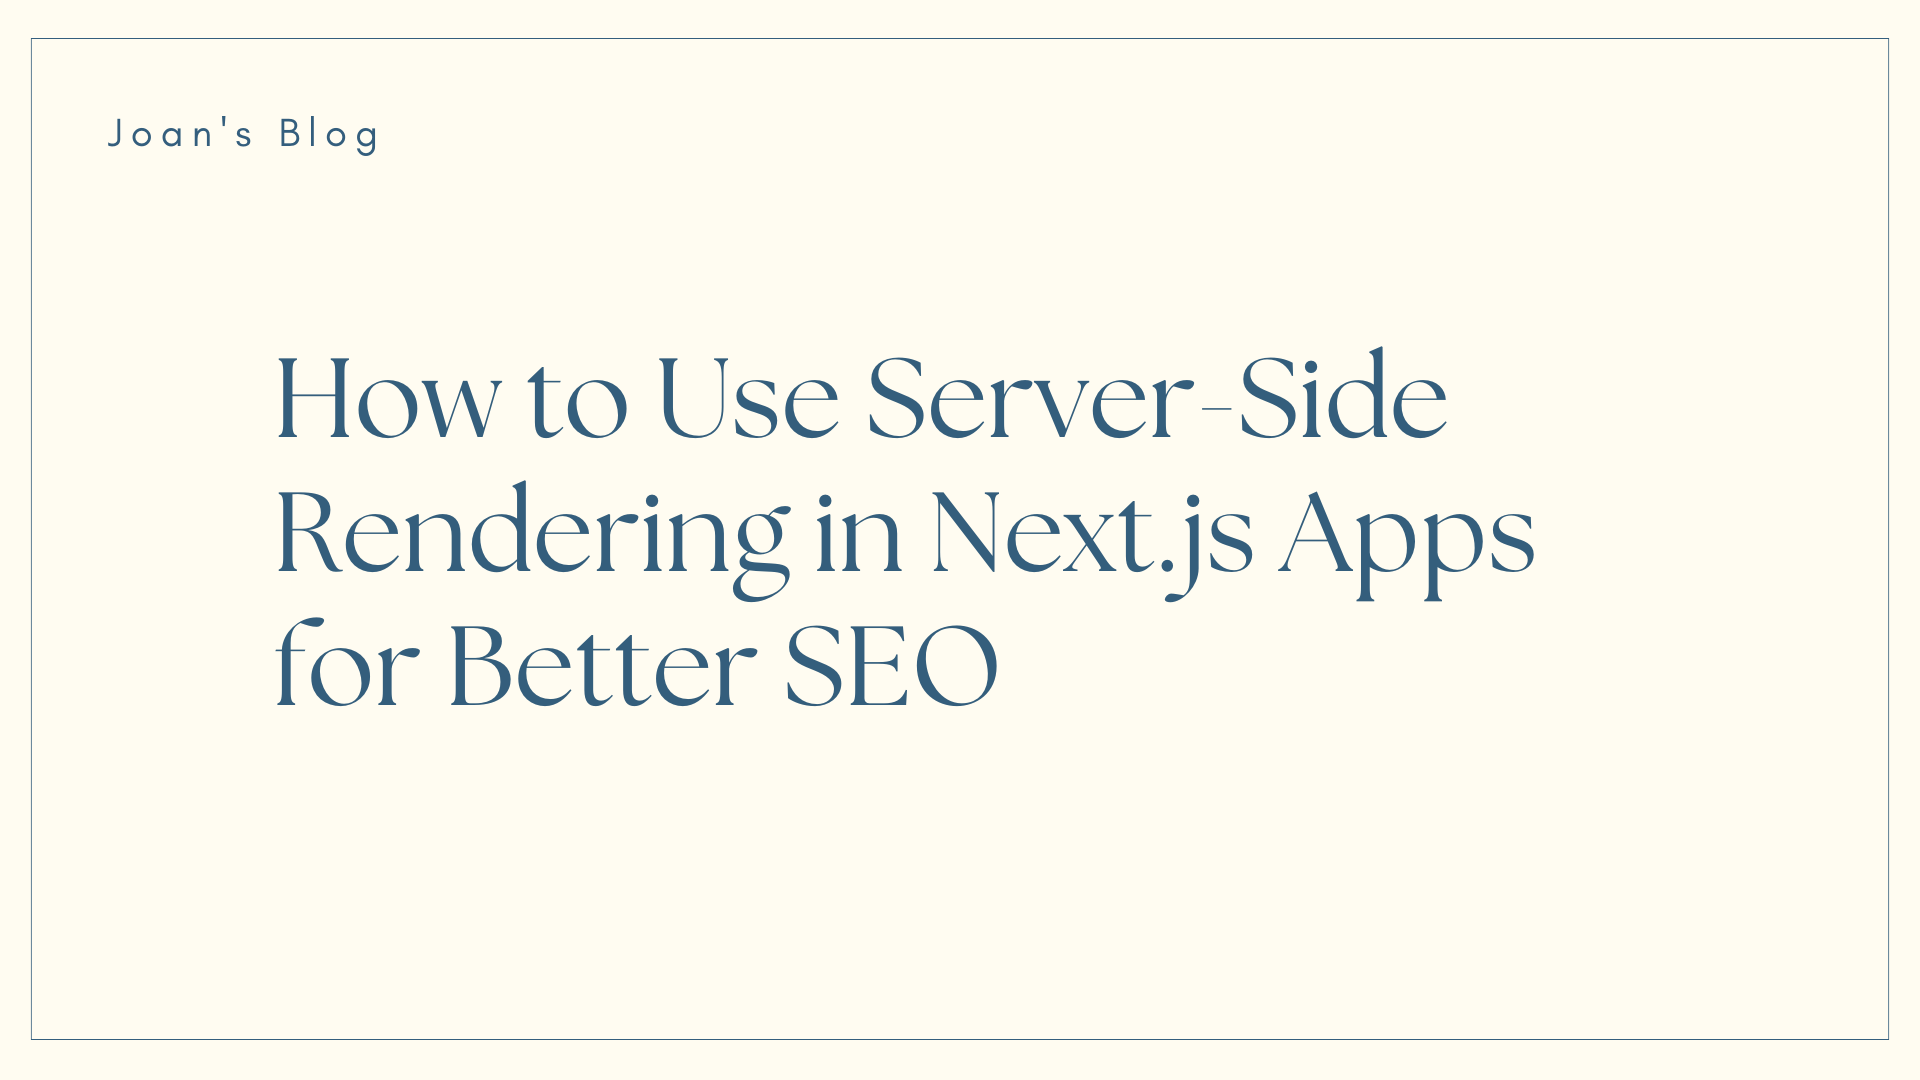 Image for How to Use Server-Side Rendering in Next.js Apps for Better SEO